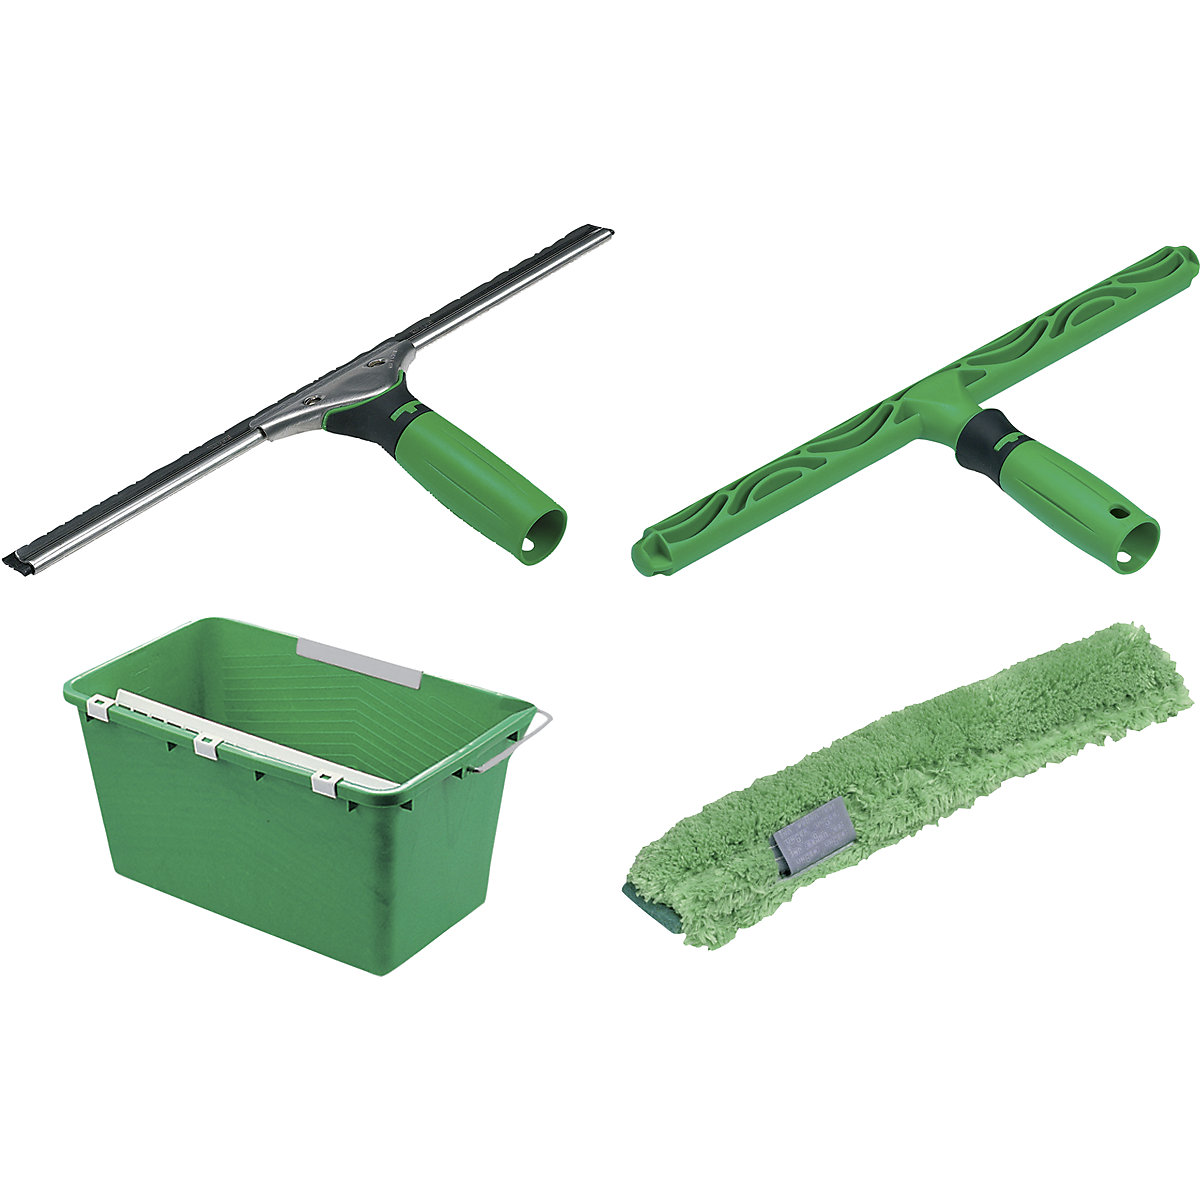 Glass cleaning set - Unger